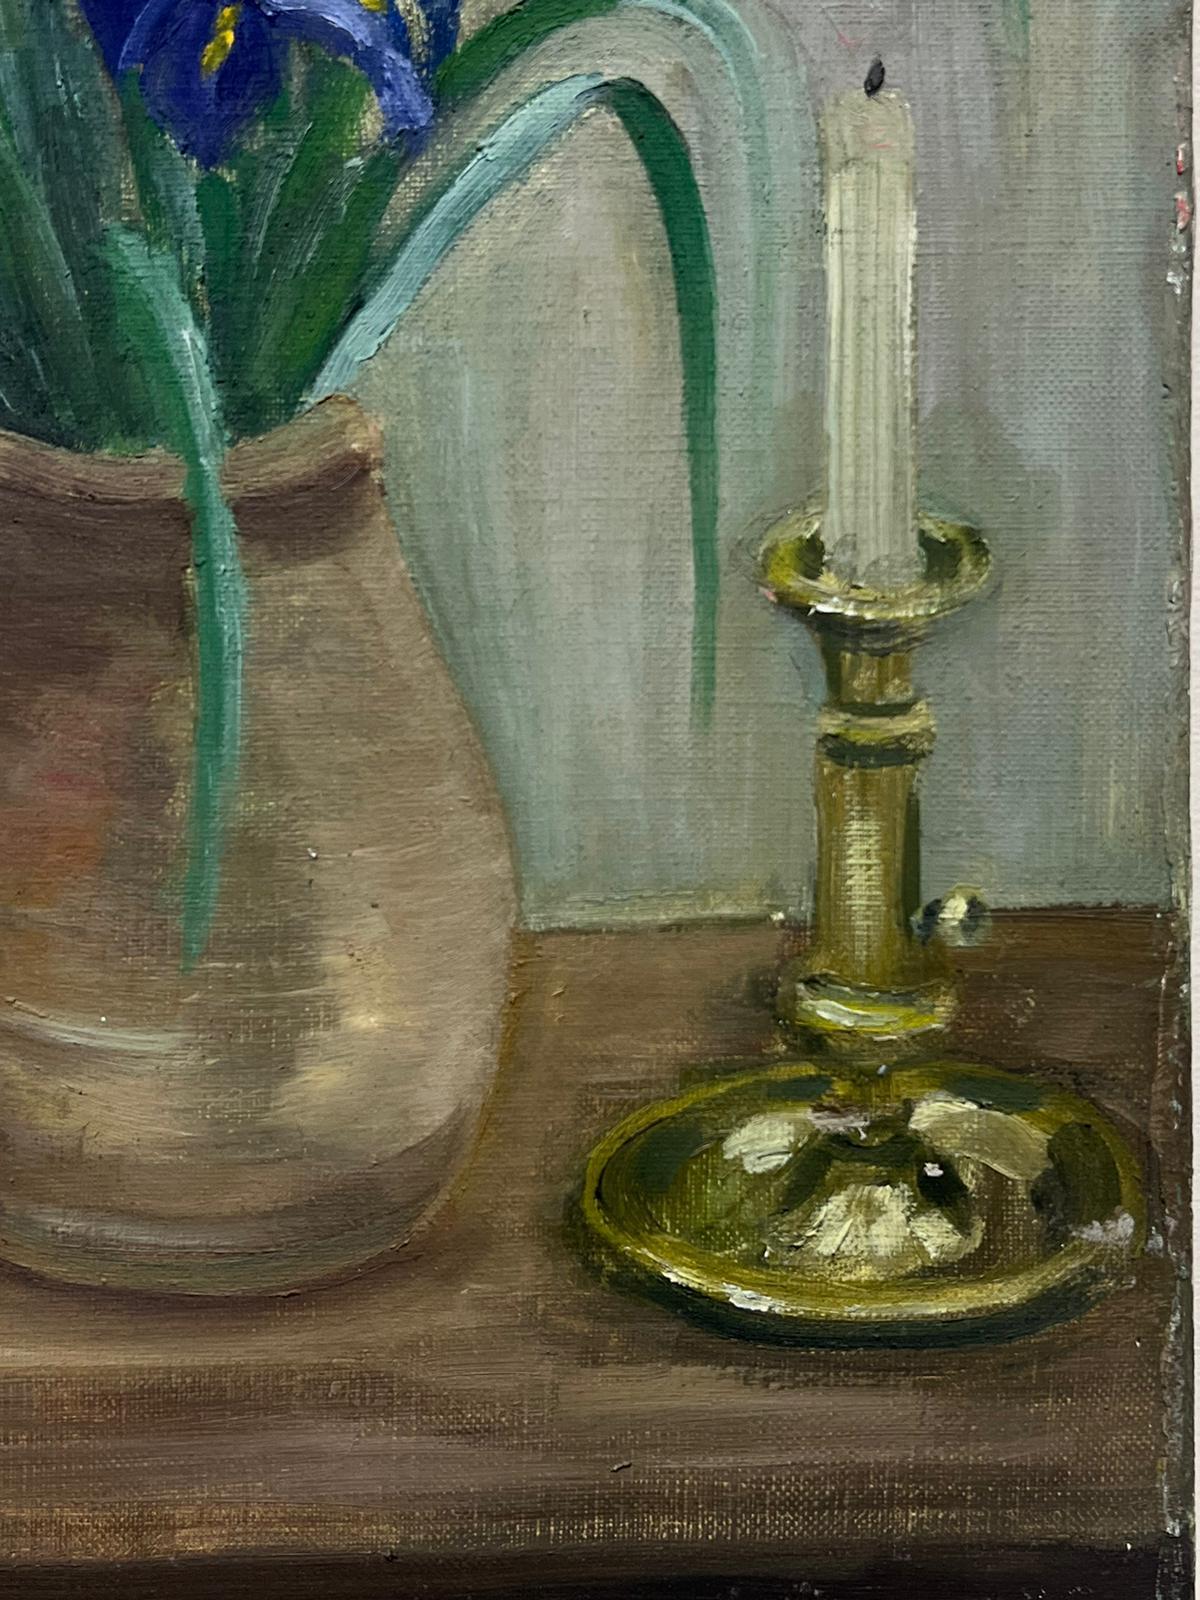 Iris Still Life
by Louise Alix (French, 1888-1980) *see notes below
provenance stamp to the back 
oil painting on canvas, unframed
measures: 18 high by 10.75 inches wide
condition: overall very good and sound, a few scuffs and marks to the surface